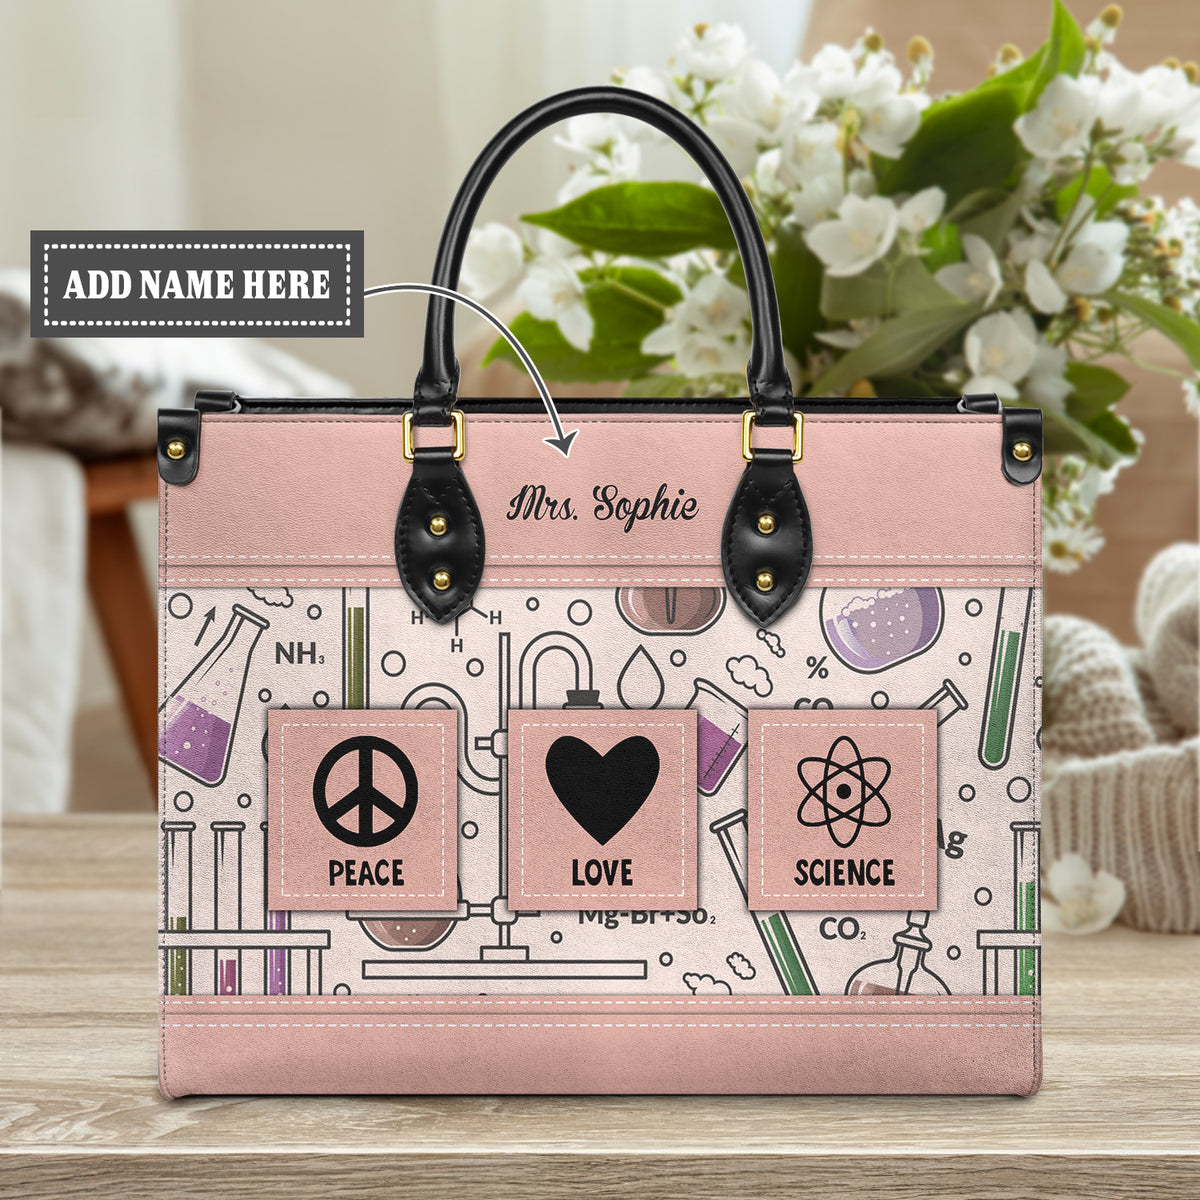 Slingbags | 7 Peace Channel Bags | Freeup